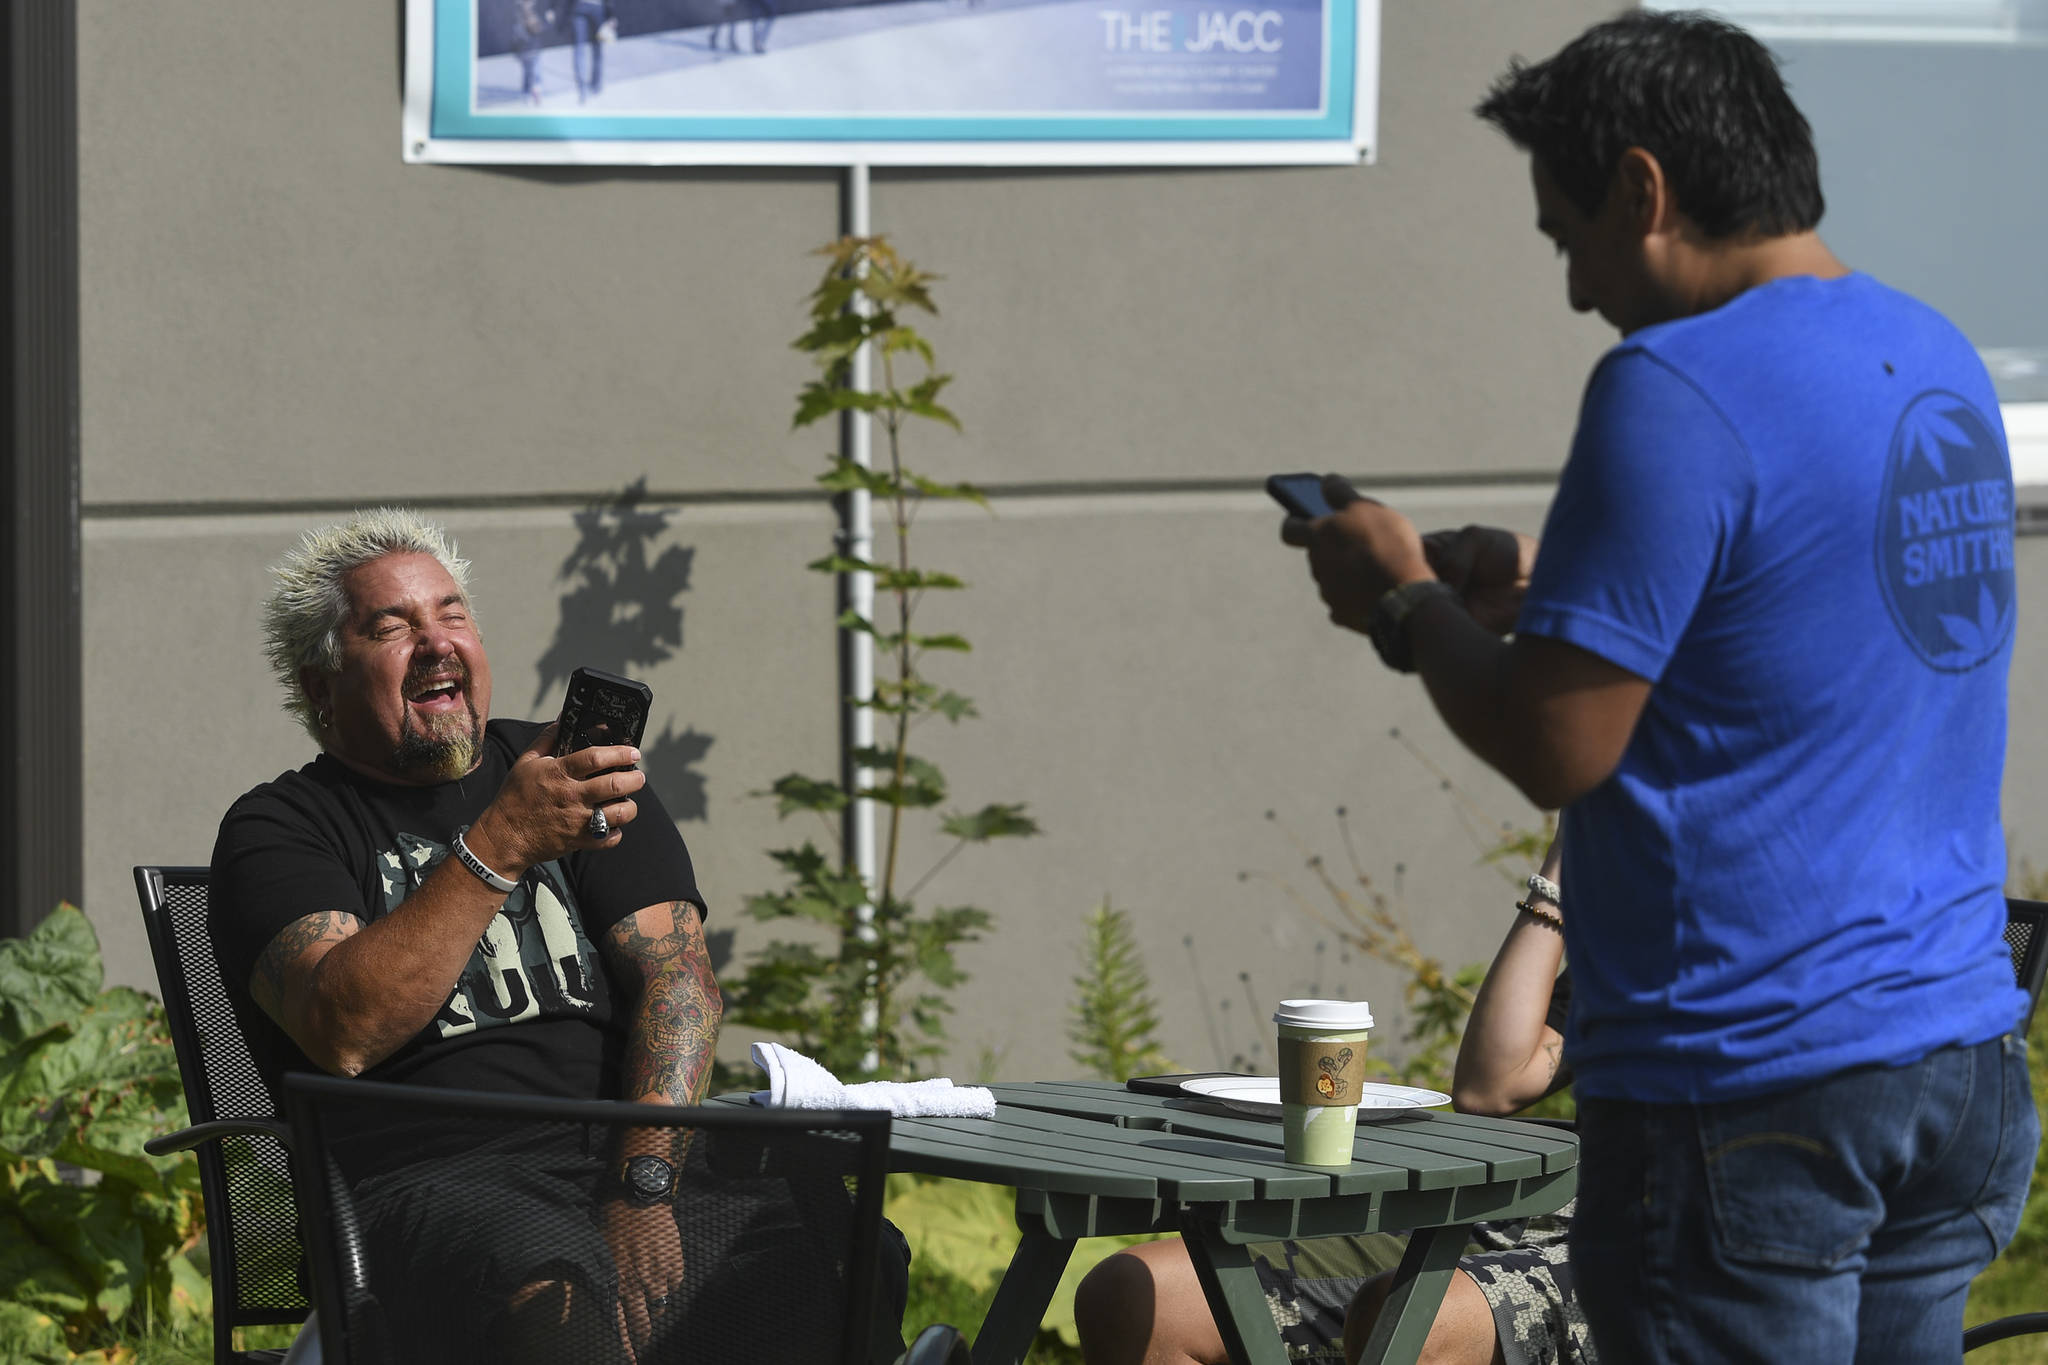 Guy Fieri, host of Diners, Drive-Ins and Dives, reacts while in front of the Juneau Arts & Culture Center on Tuesday, Aug. 13, 2019. Fieri has been seen filming at Pucker Wilson’s, Bun Daddy, Forno Rosso Pizzeria, Zerelda’s Bistro and In Bocca Al Lupo. (Michael Penn | Juneau Empire)